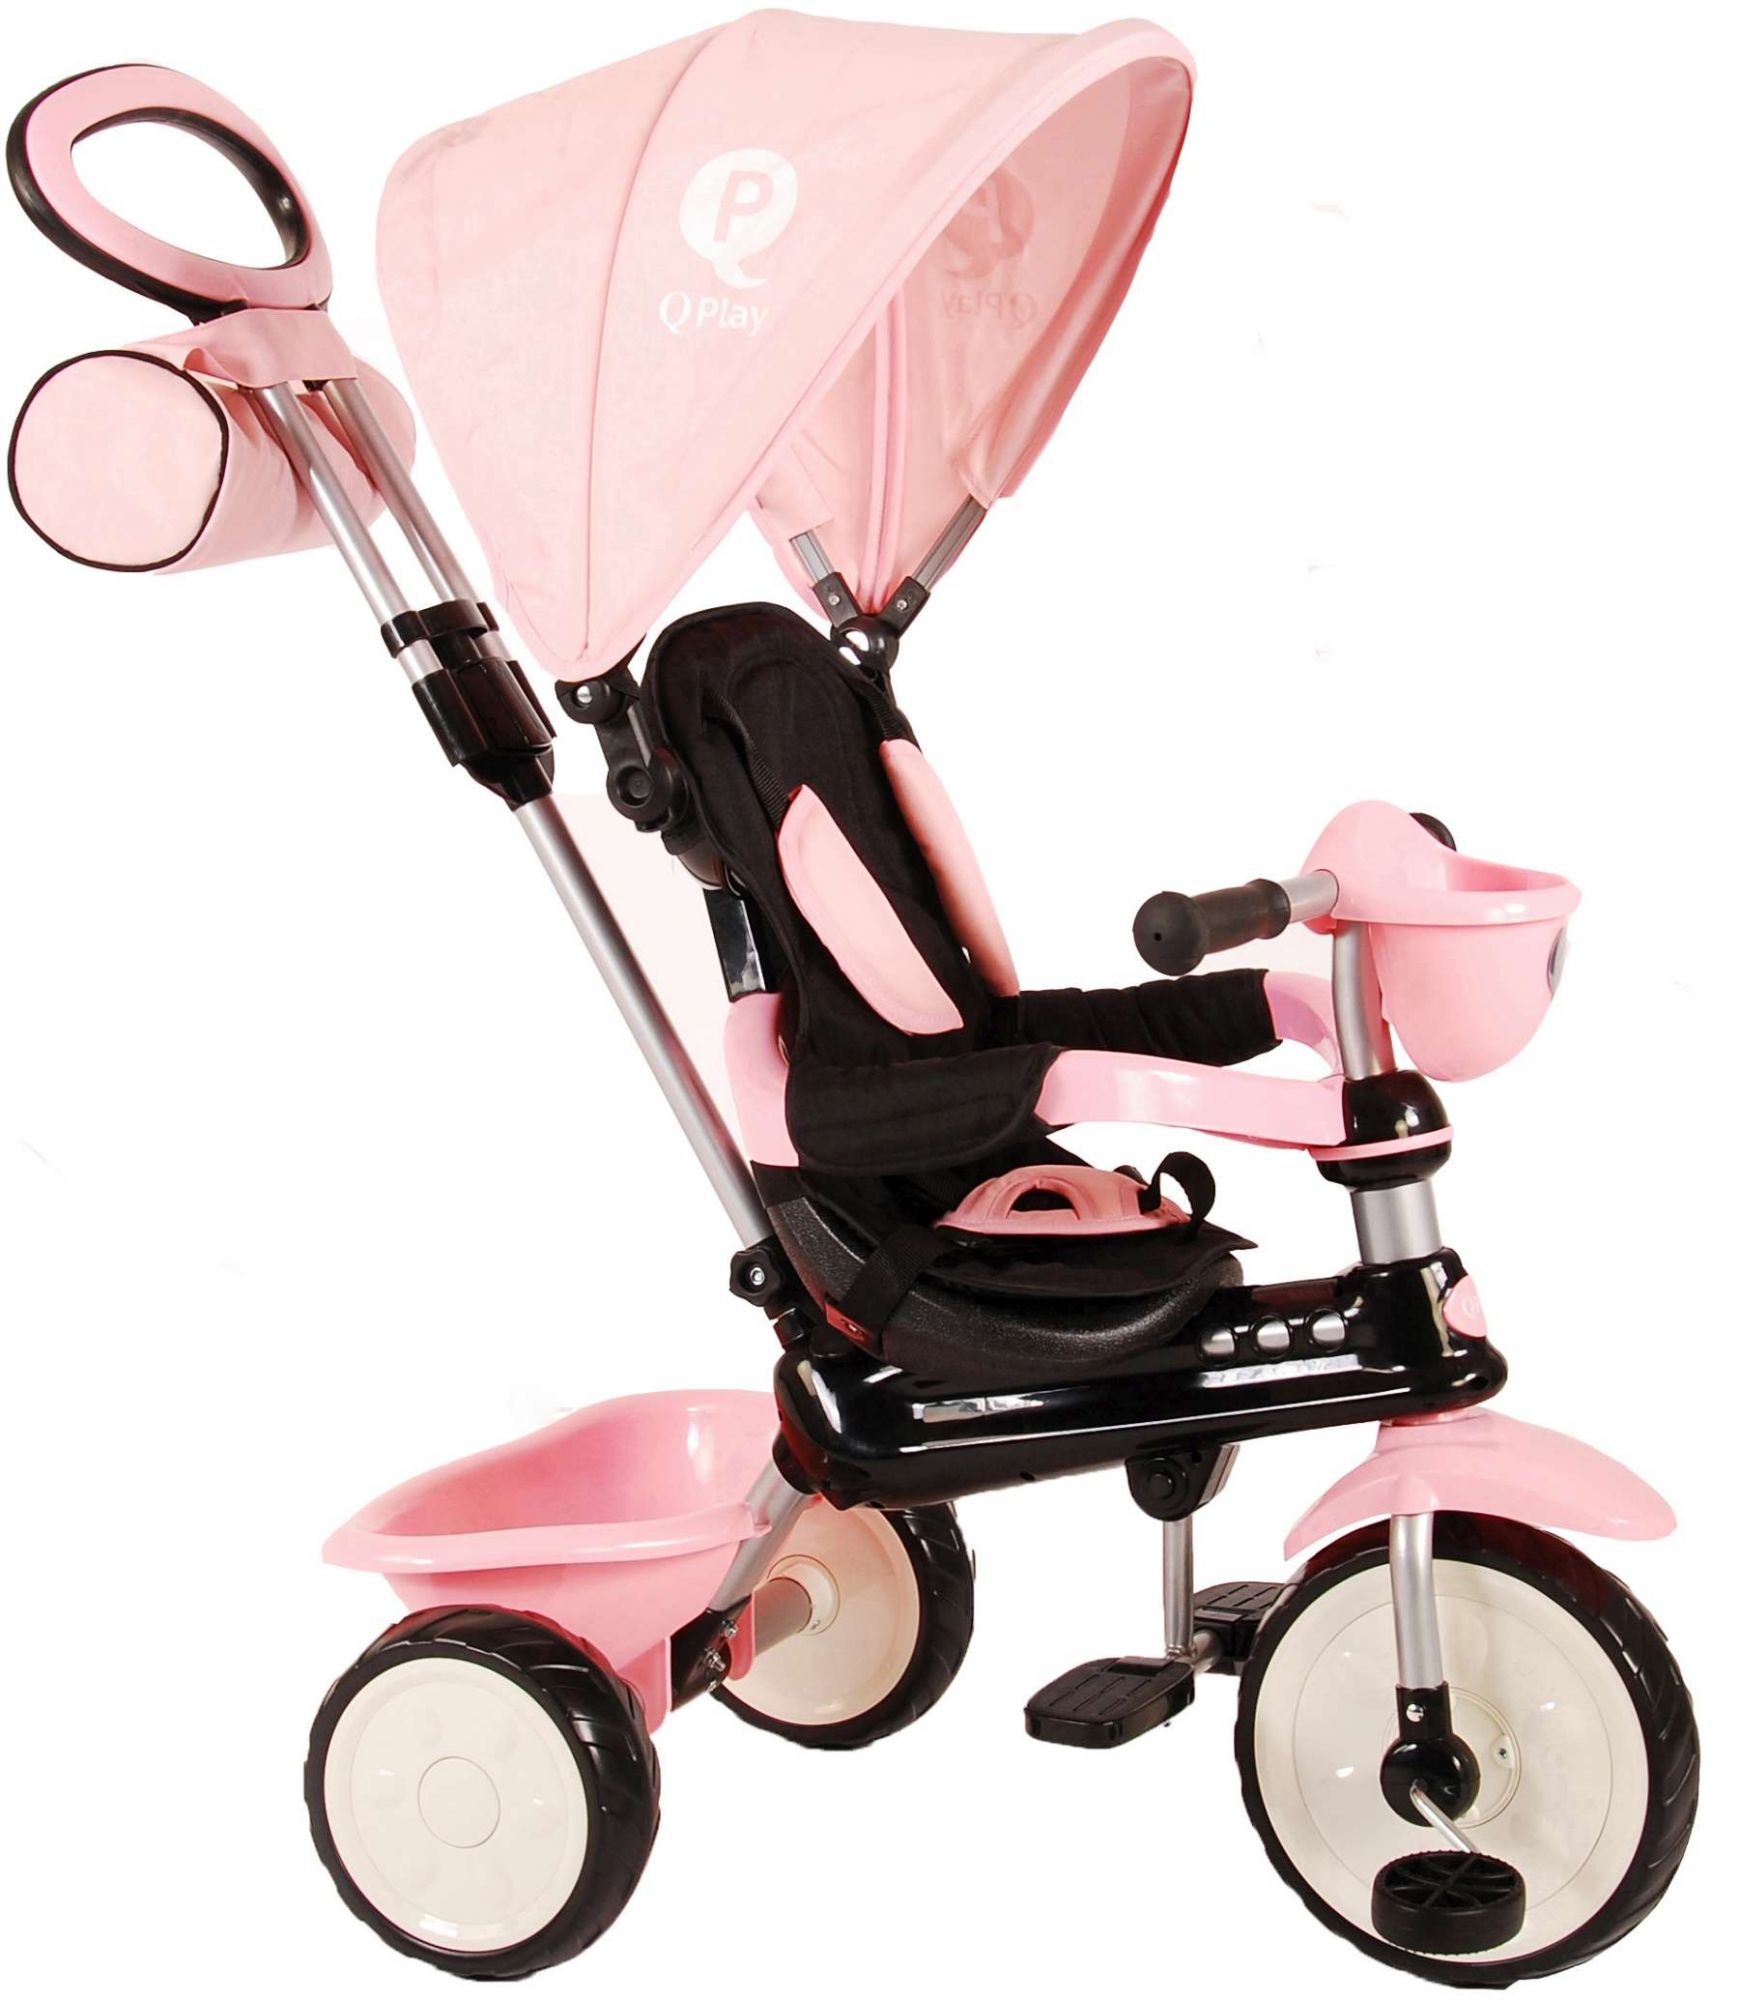 girls pink tricycle